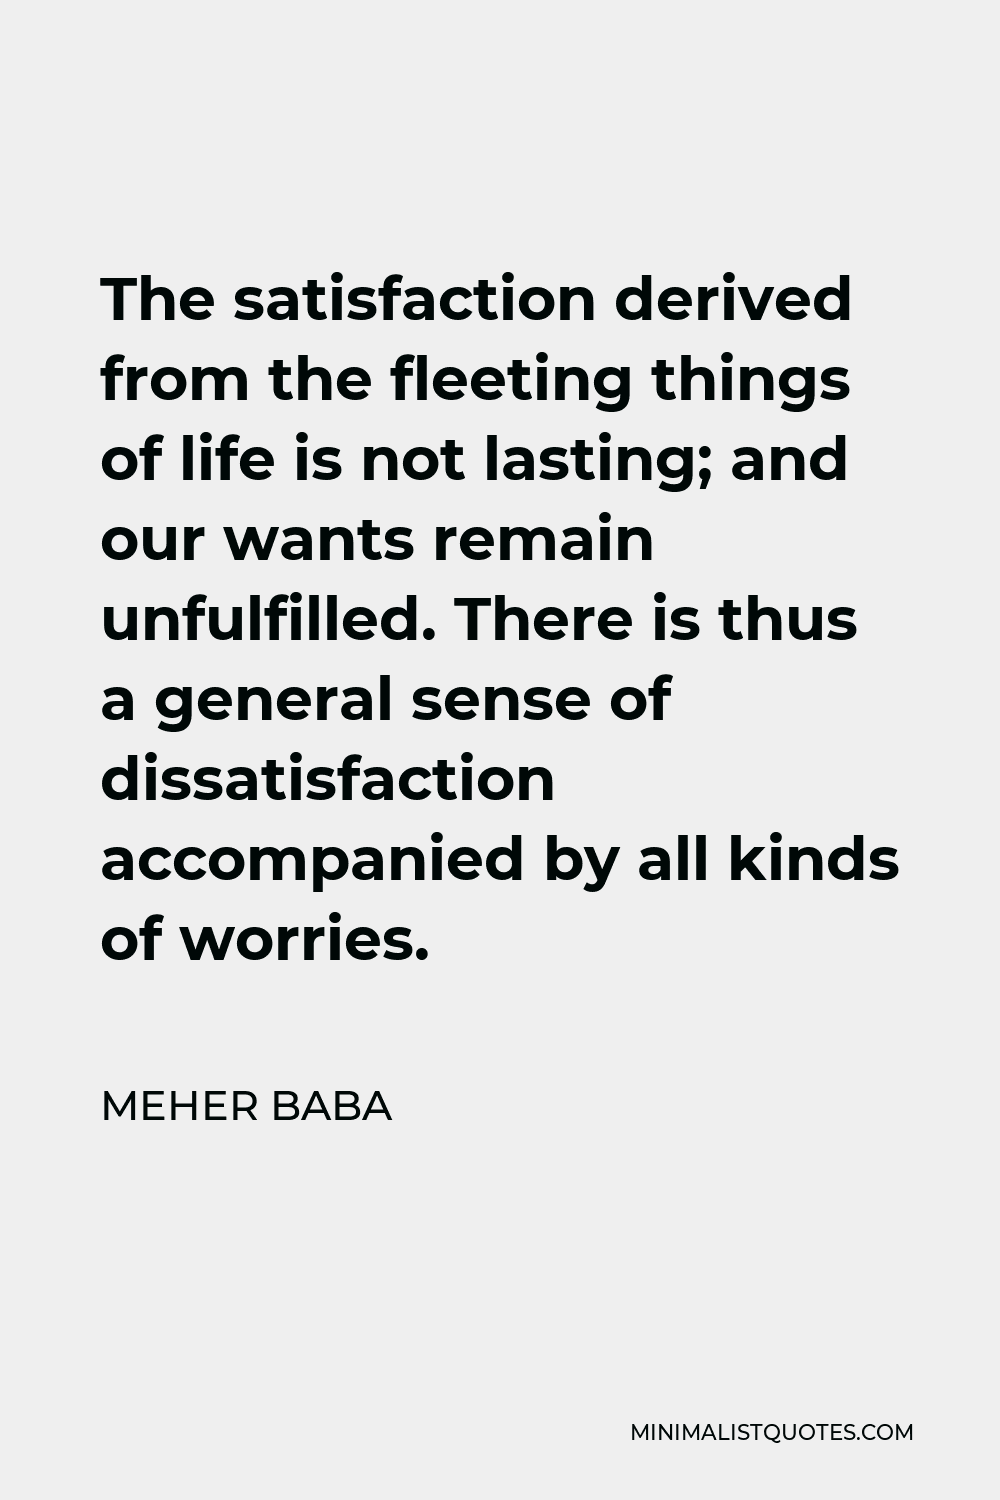 Meher Baba Quote - The satisfaction derived from the fleeting things of life is not lasting; and our wants remain unfulfilled. There is thus a general sense of dissatisfaction accompanied by all kinds of worries.